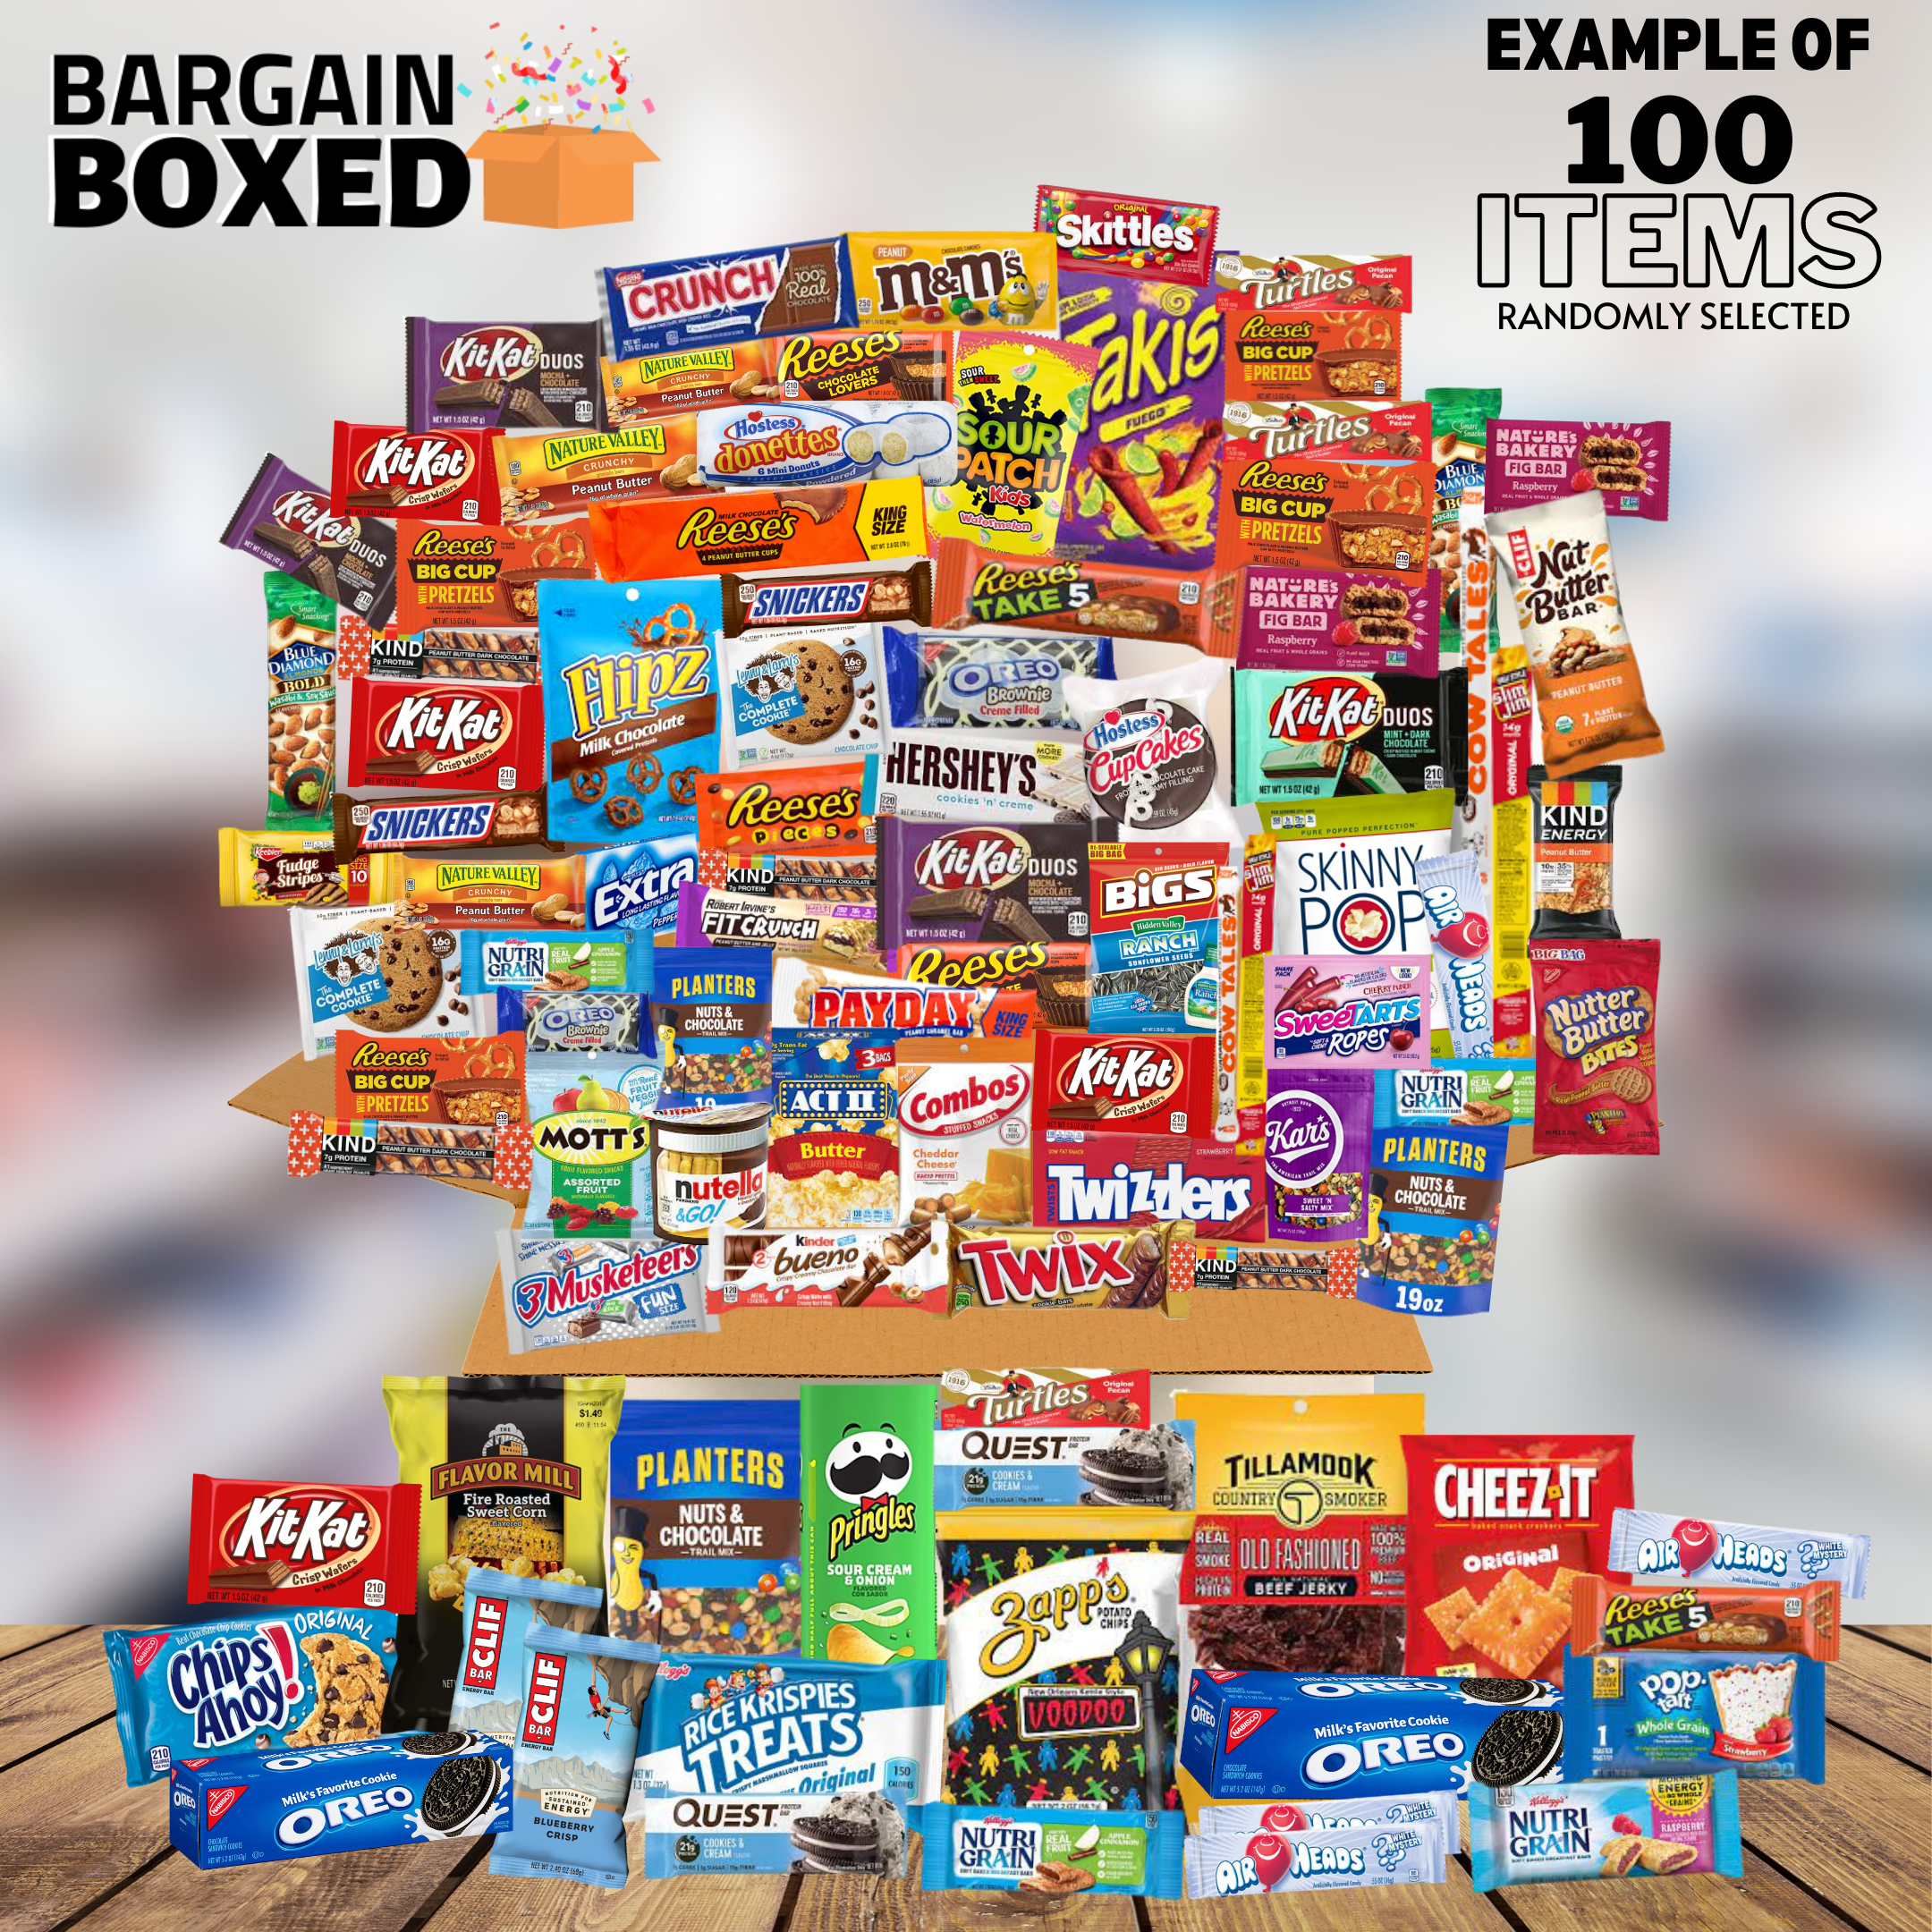 The Bargain Food Box | Discount Snack Box, Full Size Candy Bars In Bulk, Salvage Grocery, Candy In Bulk, Discount Food & More!